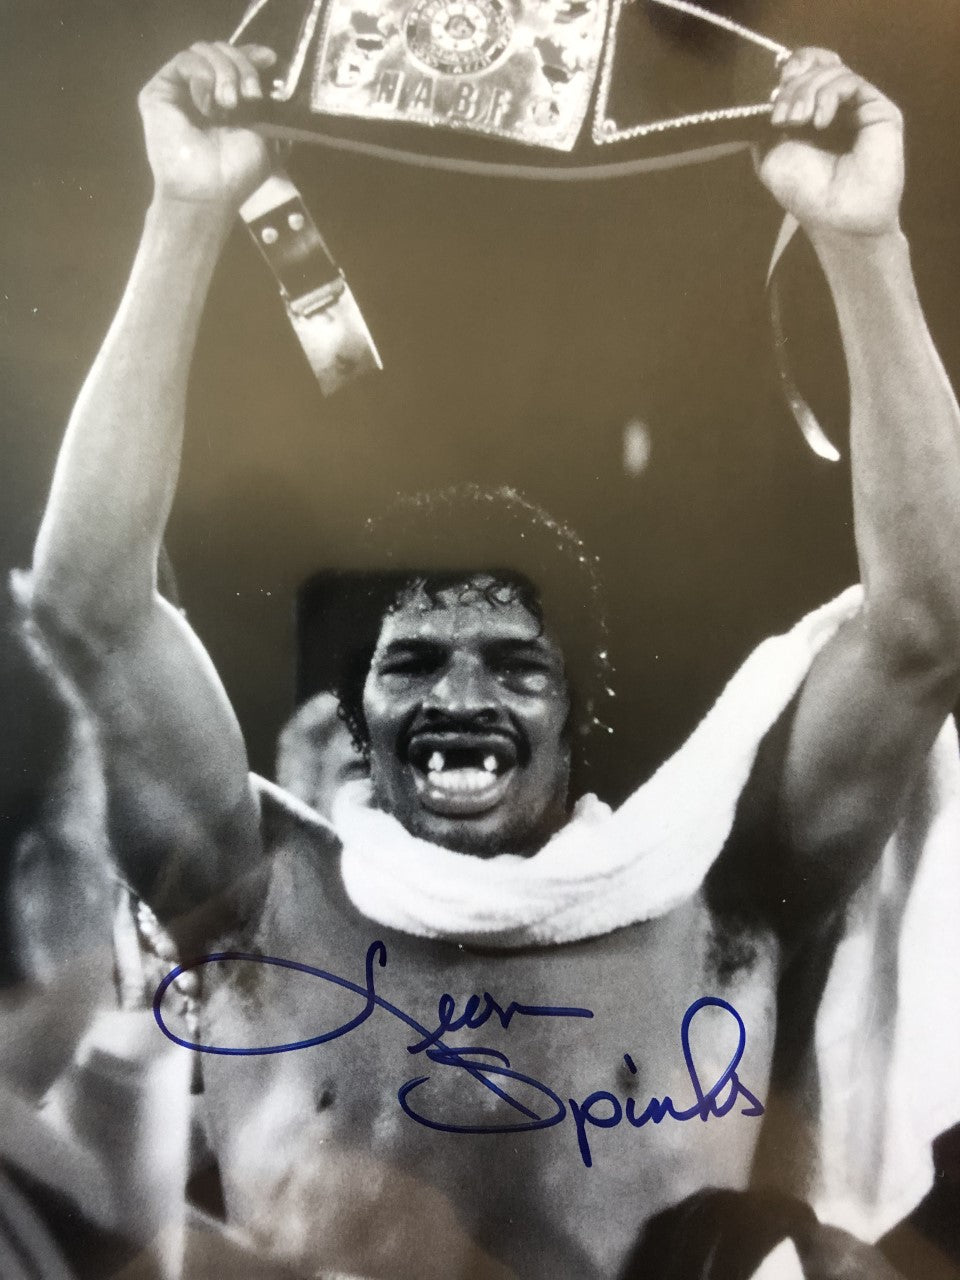 Leon Spinks Signed Authentic Autographed 8x10 Photo Hand Signed COA